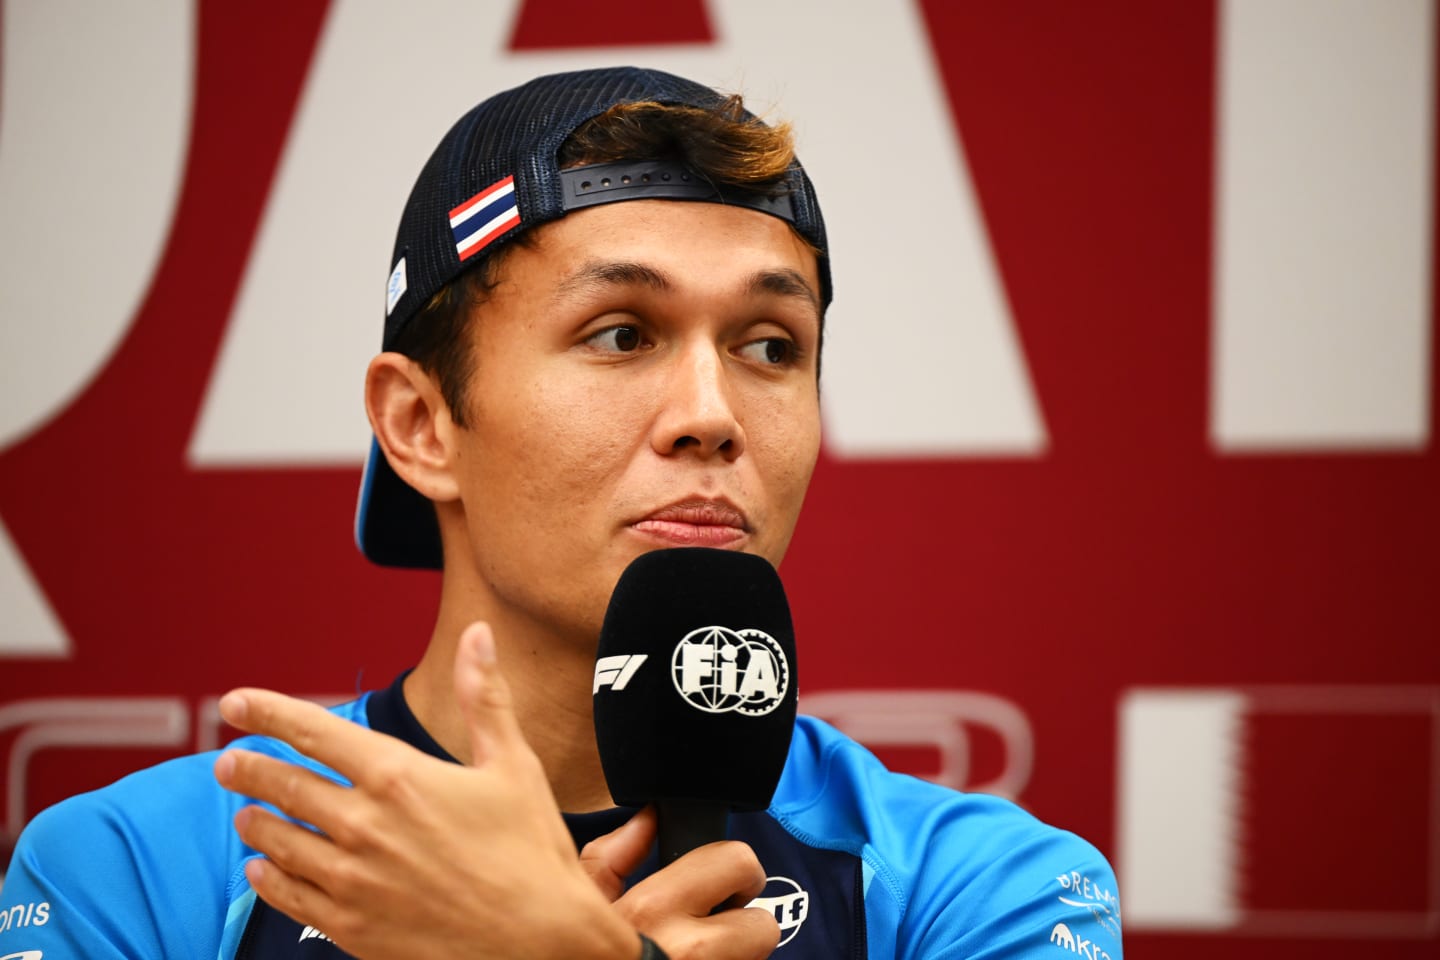 LUSAIL CITY, QATAR - OCTOBER 05: Alexander Albon of Thailand and Williams attends the Drivers Press Conference during previews ahead of the F1 Grand Prix of Qatar at Lusail International Circuit on October 05, 2023 in Lusail City, Qatar. (Photo by Clive Mason/Getty Images)